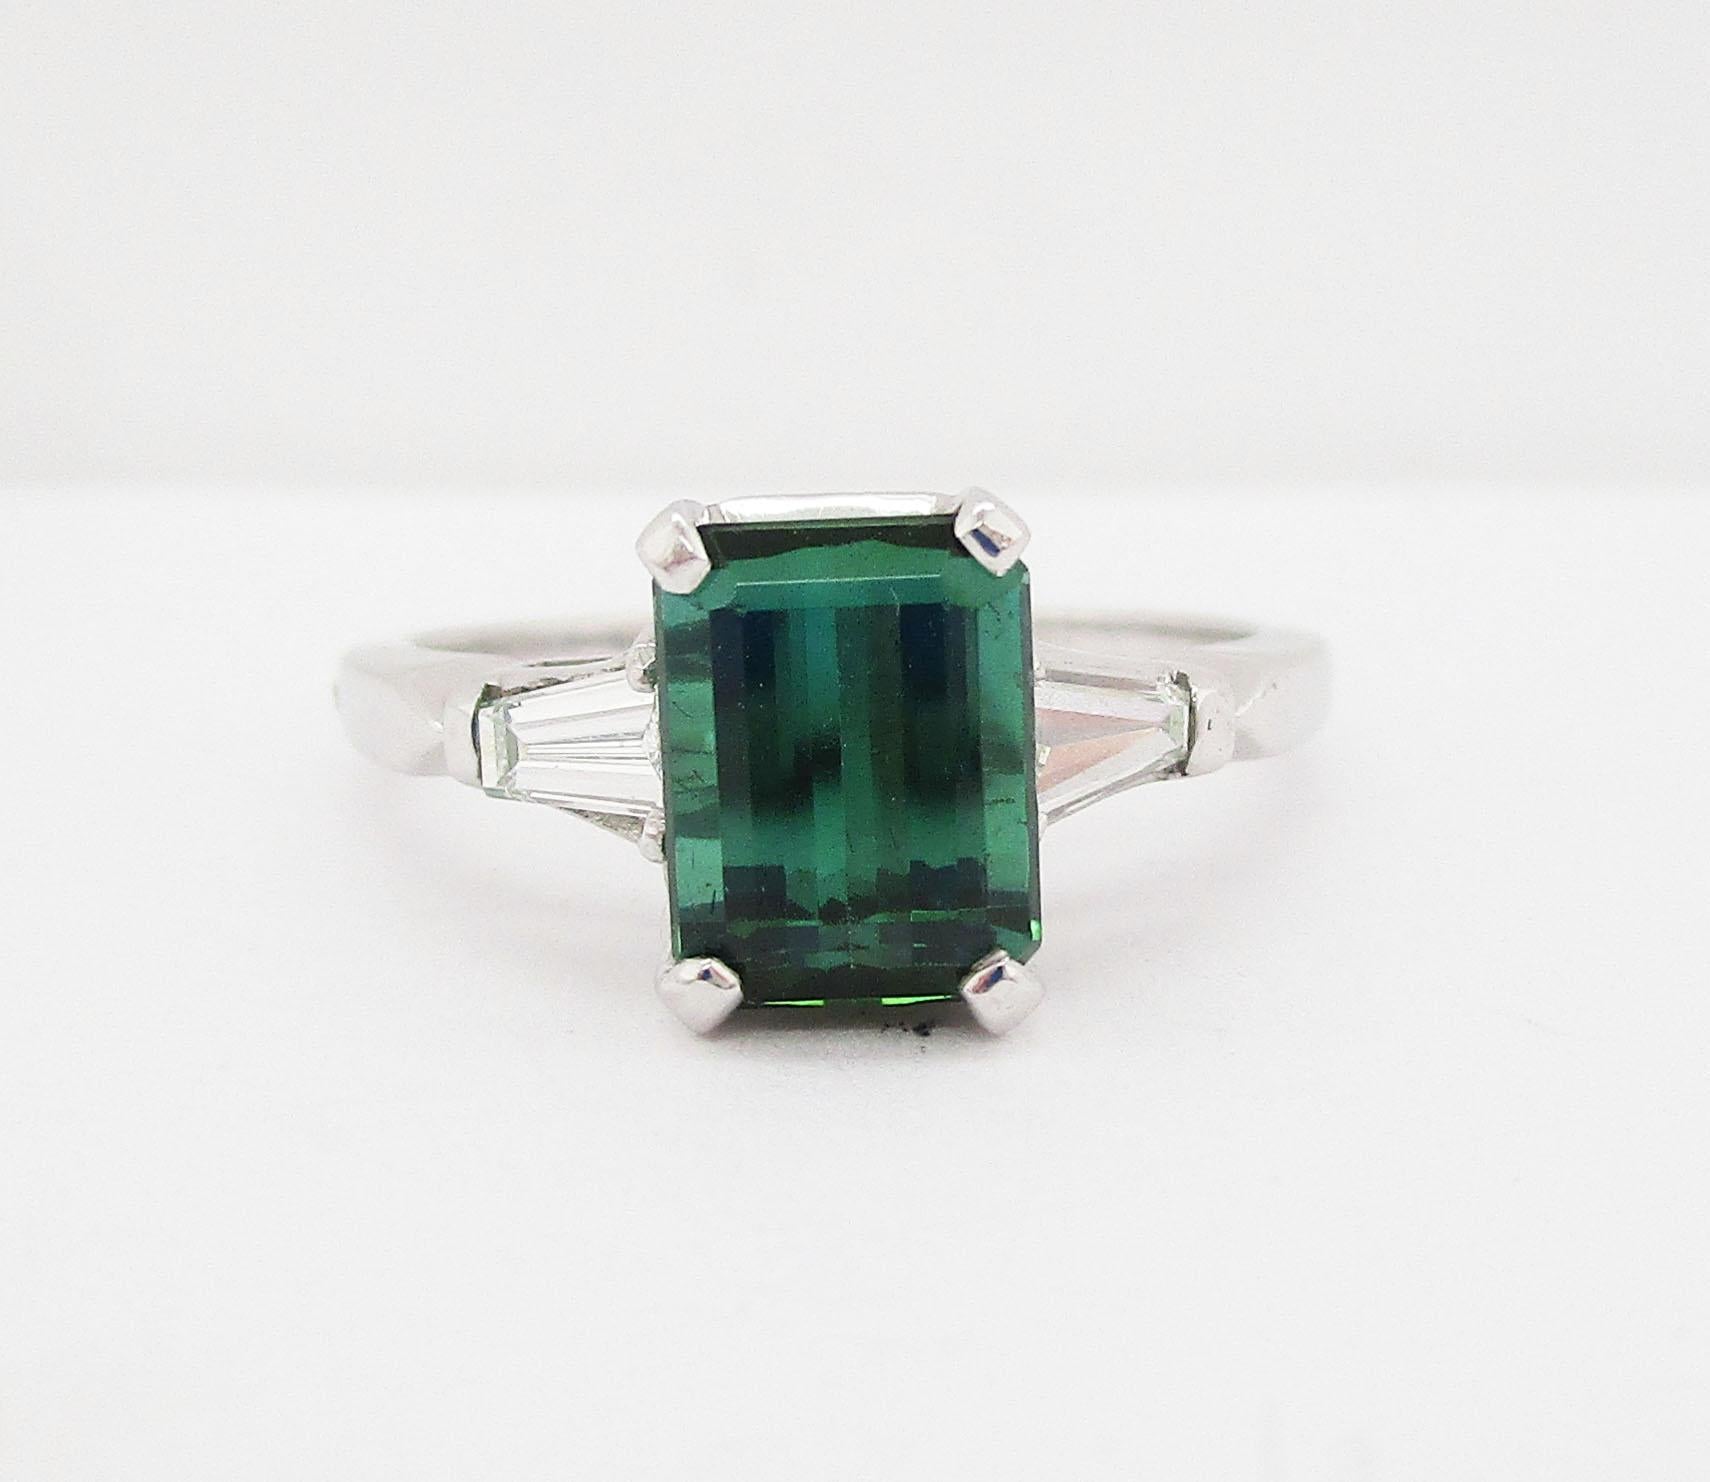 This is a gorgeous white platinum ring featuring an emerald cut green tourmaline center flanked by brilliant white tapered baguette diamonds. The center stone has a rich, deep green hue and is incredibly well cut, creating a dimensional, sparkling